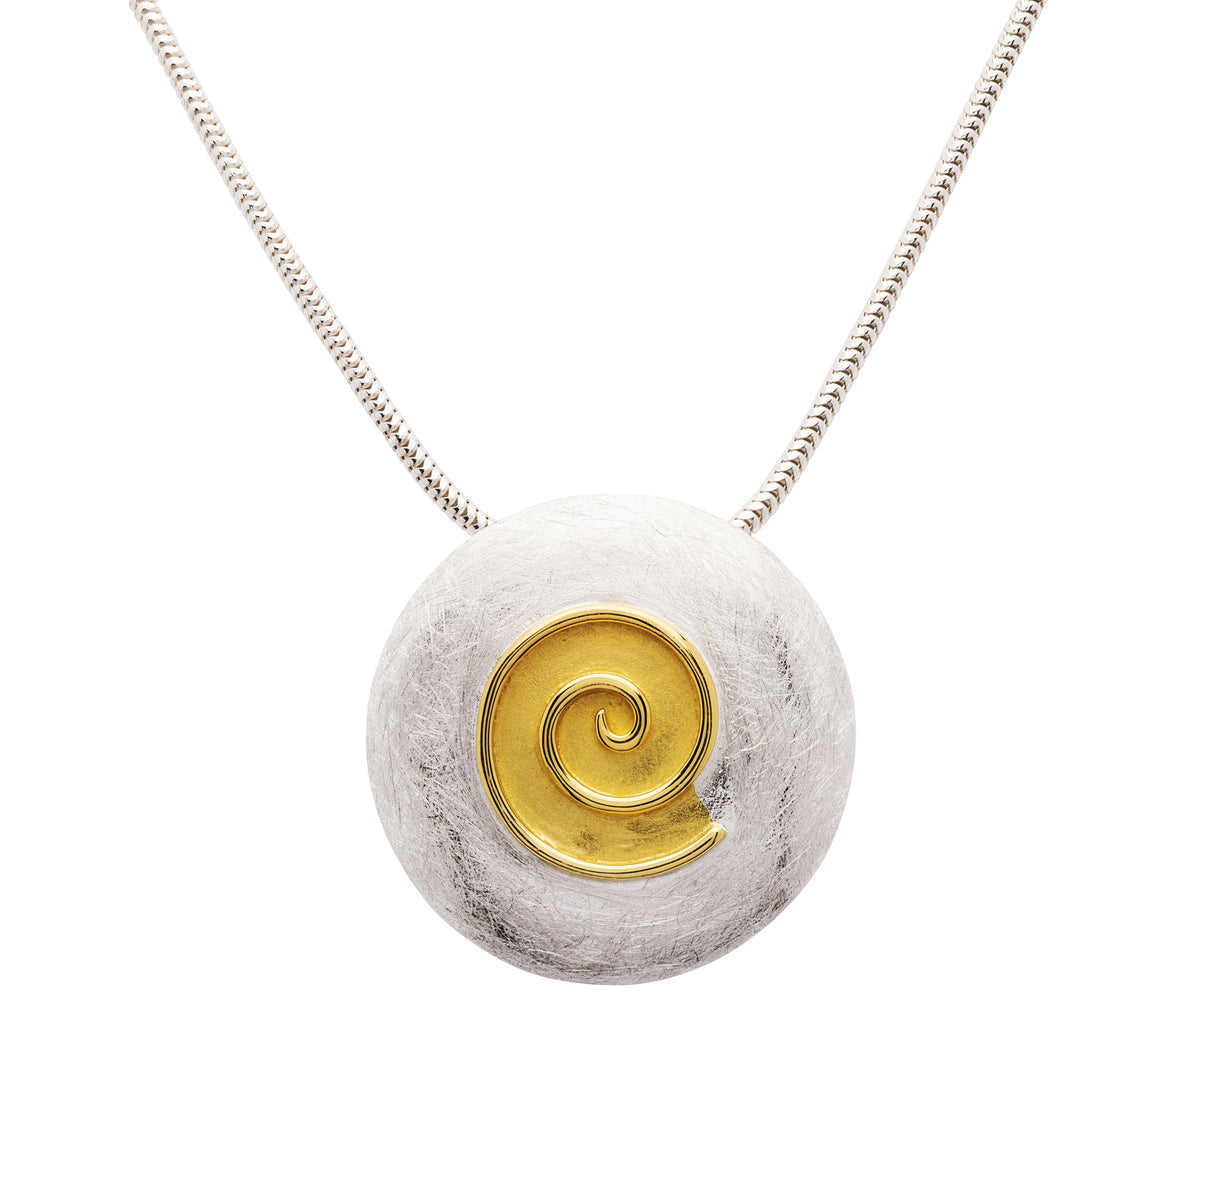 Round Sterling Silver Pendant with Spiral Detail